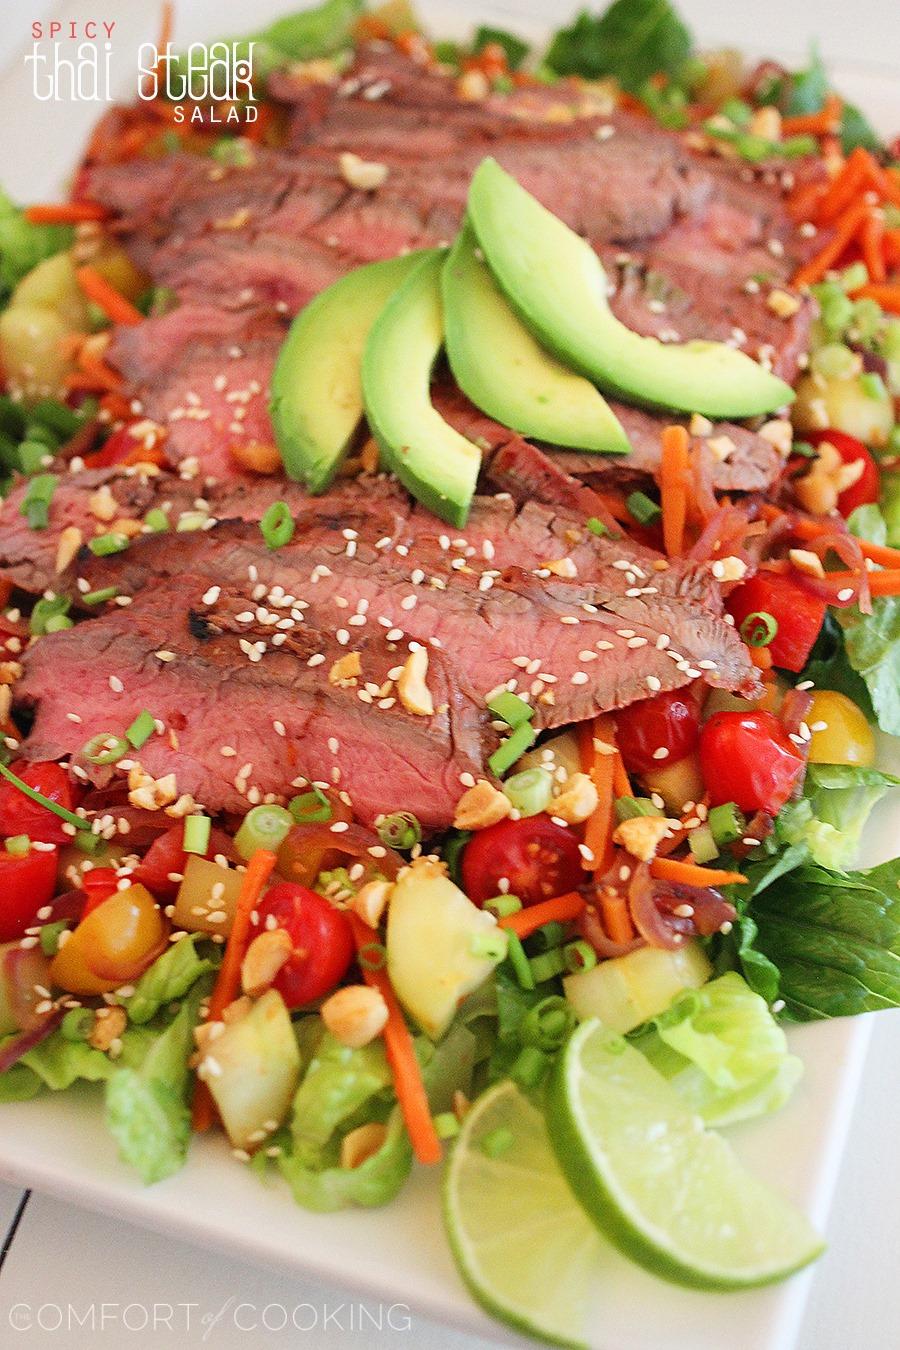 Spicy Thai Steak Salad – Kick up the spice with this scrumptious steak salad, full of fresh veggies and drizzled with a cilantro-lime dressing! | thecomfortofcooking.com